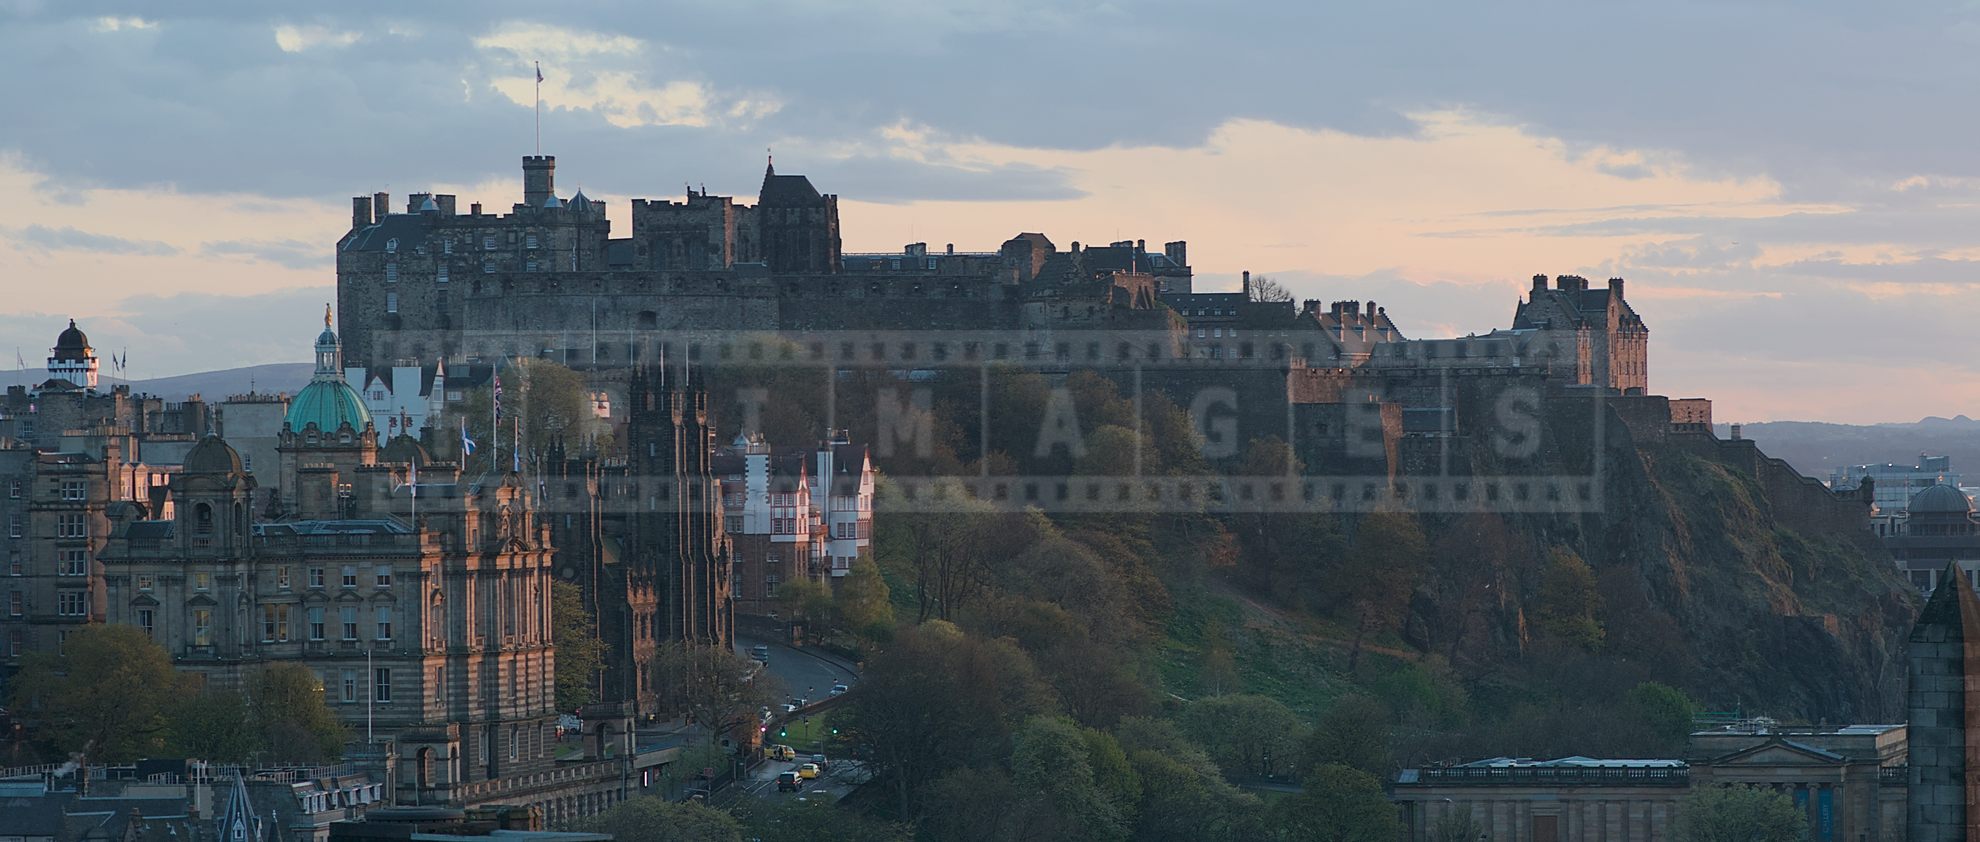 a view of Edinburgh Castle scenic landscape at sunset from the Calton Hill